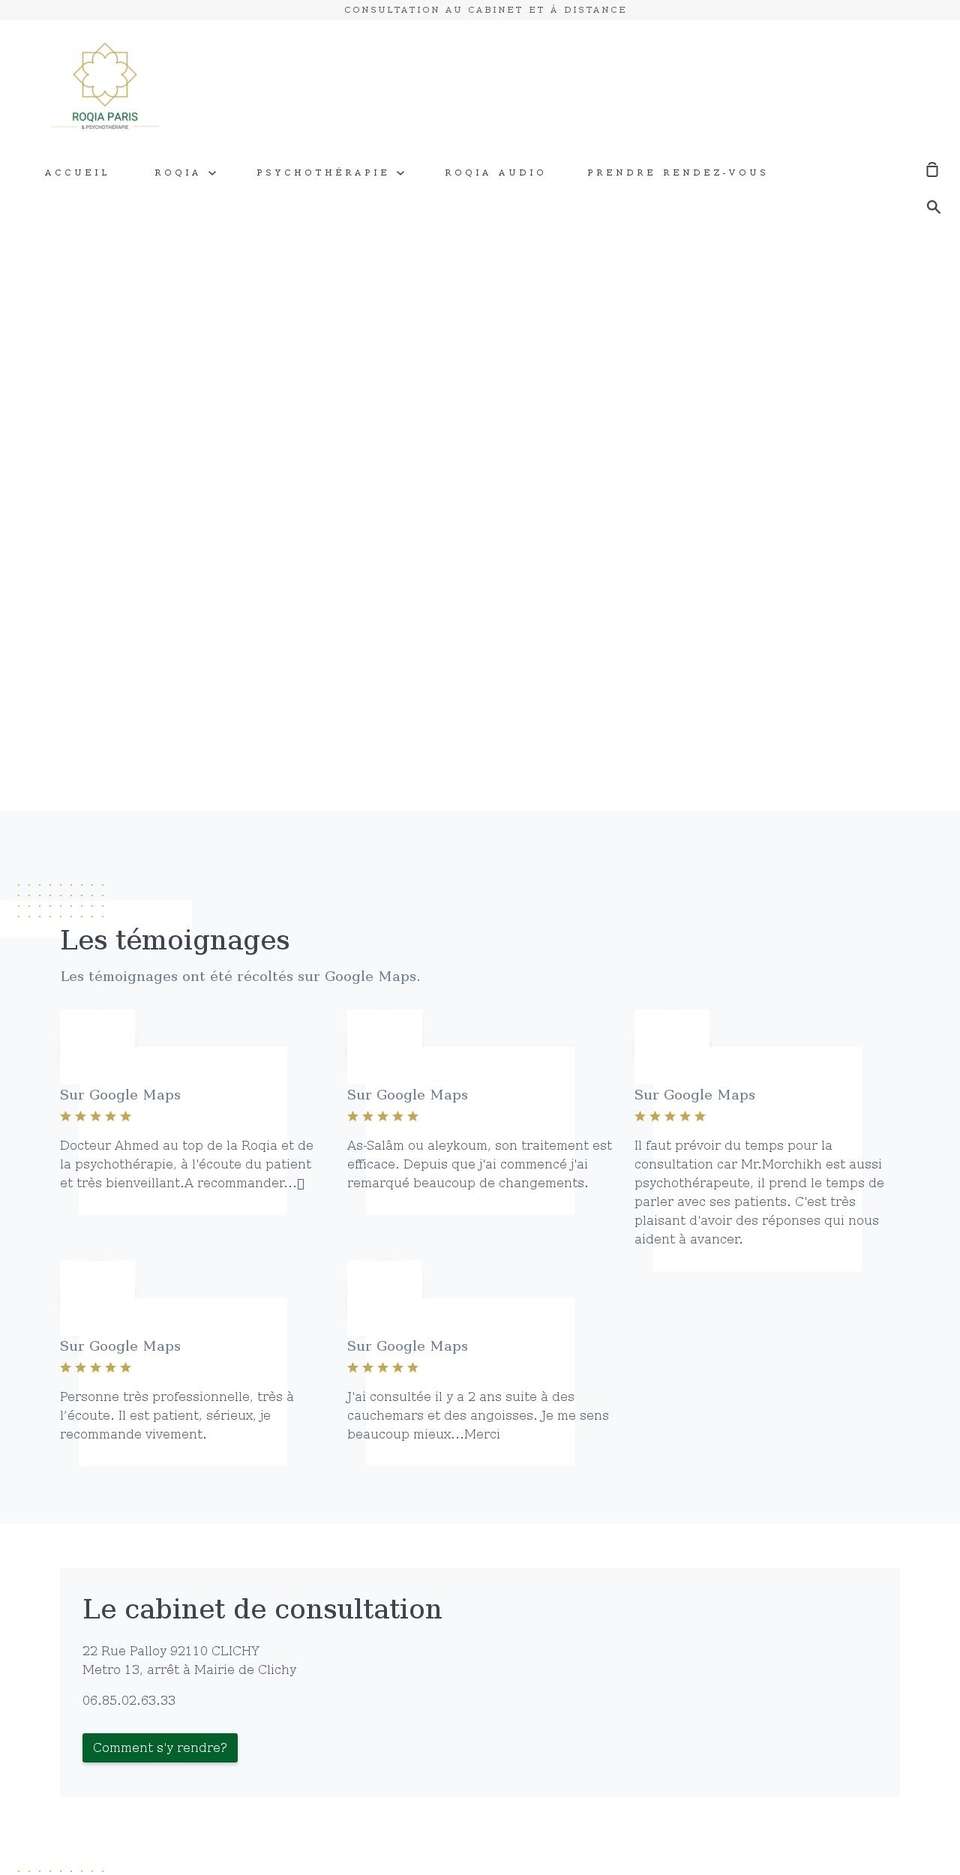 Story Shopify theme site example roqia.fr